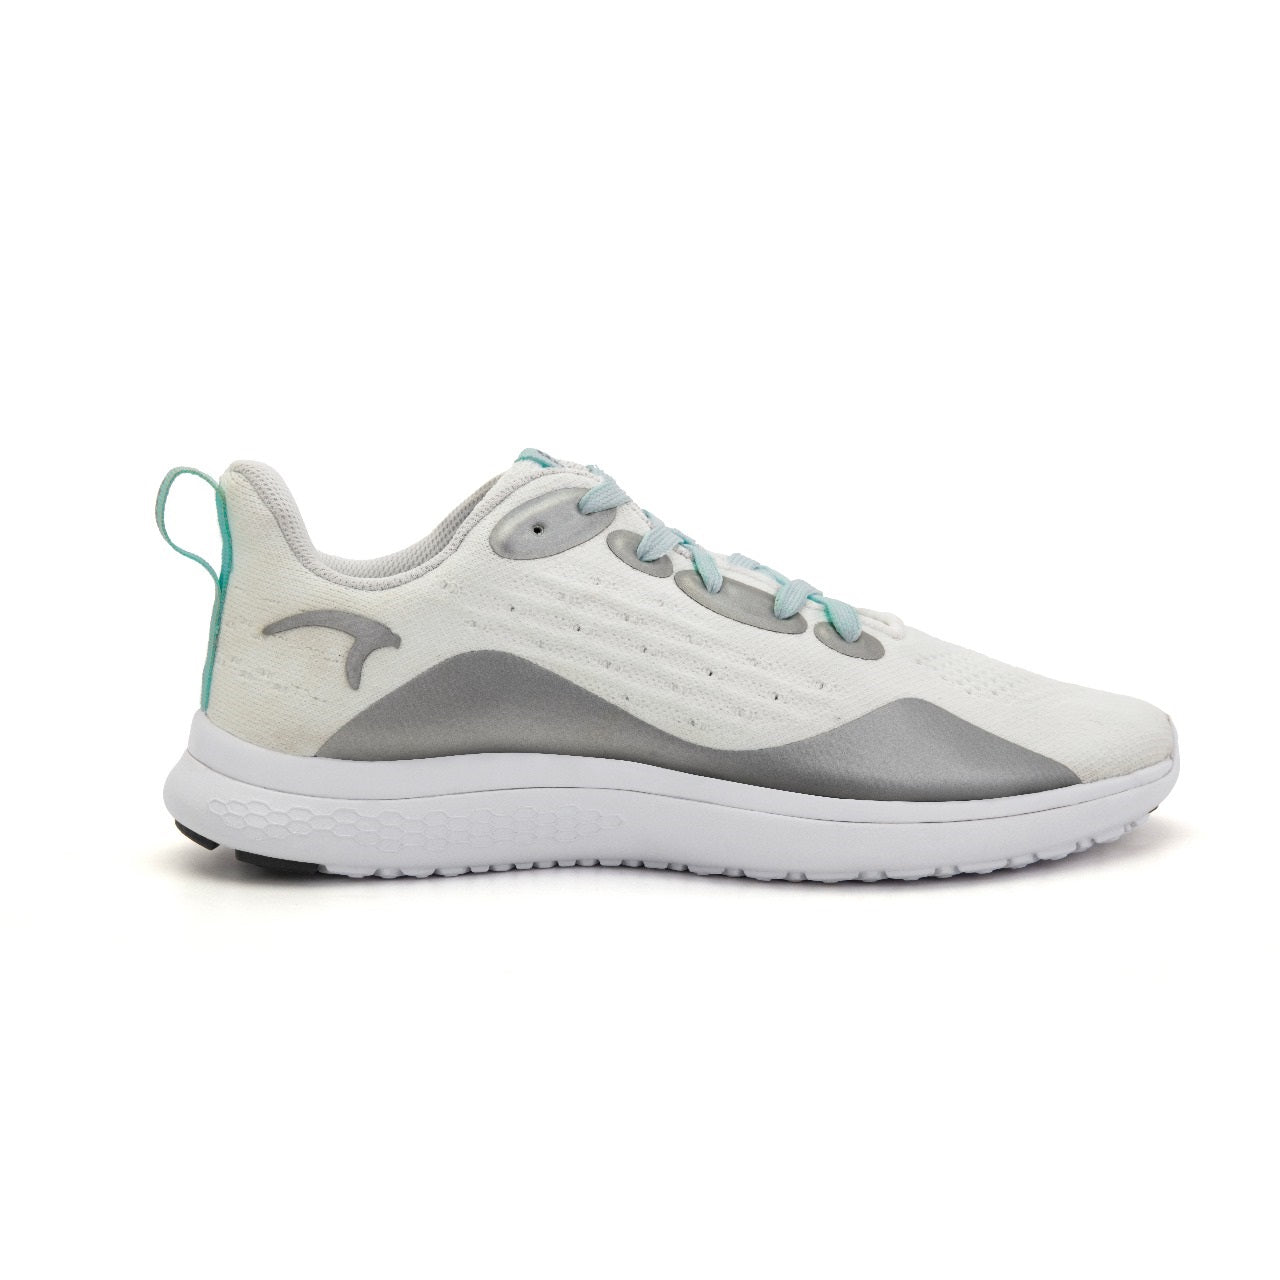 Mintra Stride Running Shoes For Women, Silver & Blue